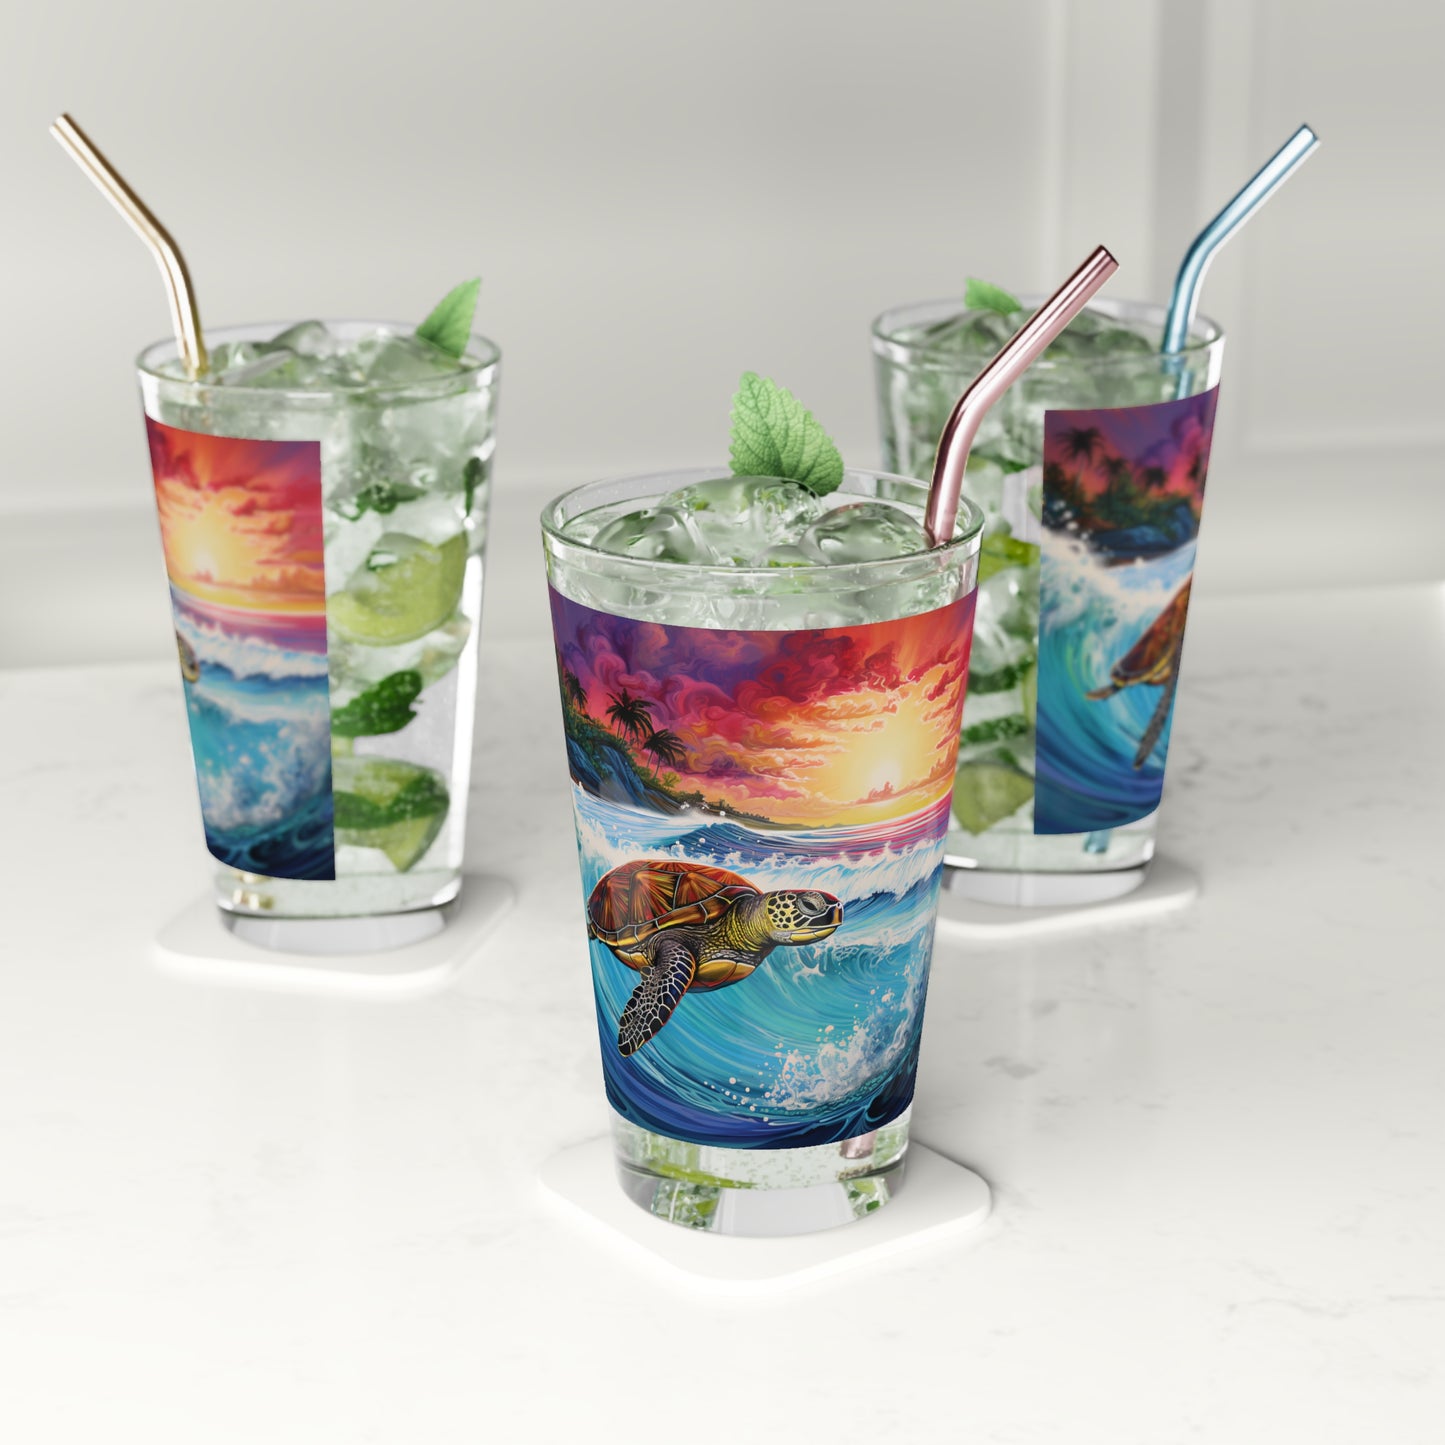 Experience the serenity of the ocean with our Turtle Surfing Color Wave Pint Glass. Waves Design #028 adorns this 16oz glass, bringing the beauty of sea turtles and vibrant waves to your fingertips. A Stashbox exclusive for nature enthusiasts.